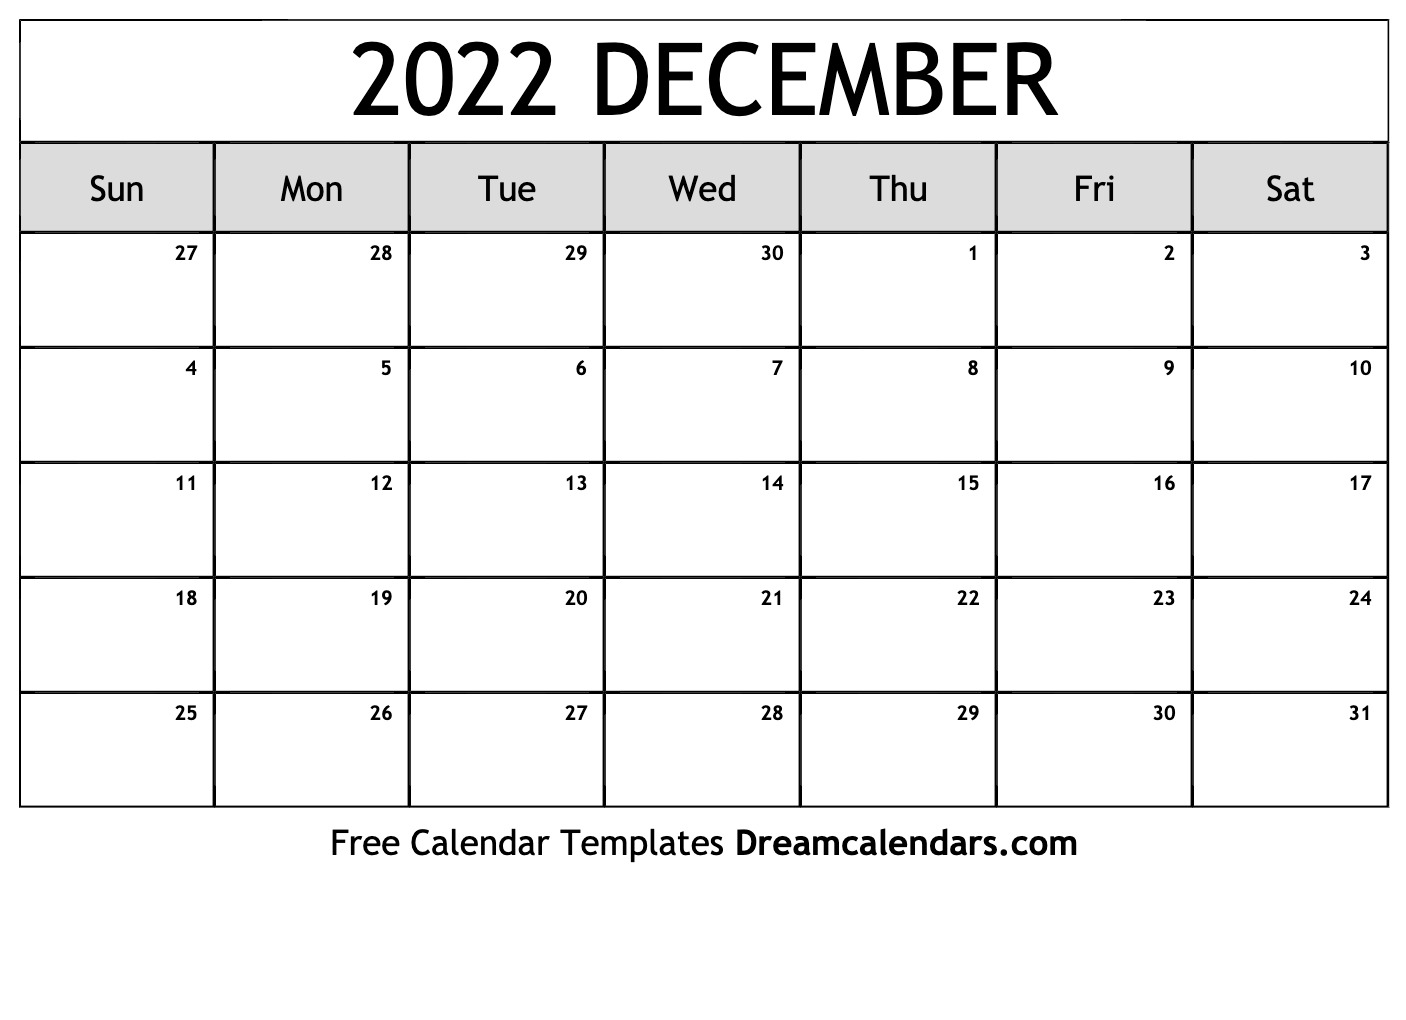 December 2022 Calendar Free Printable with Holidays and Observances